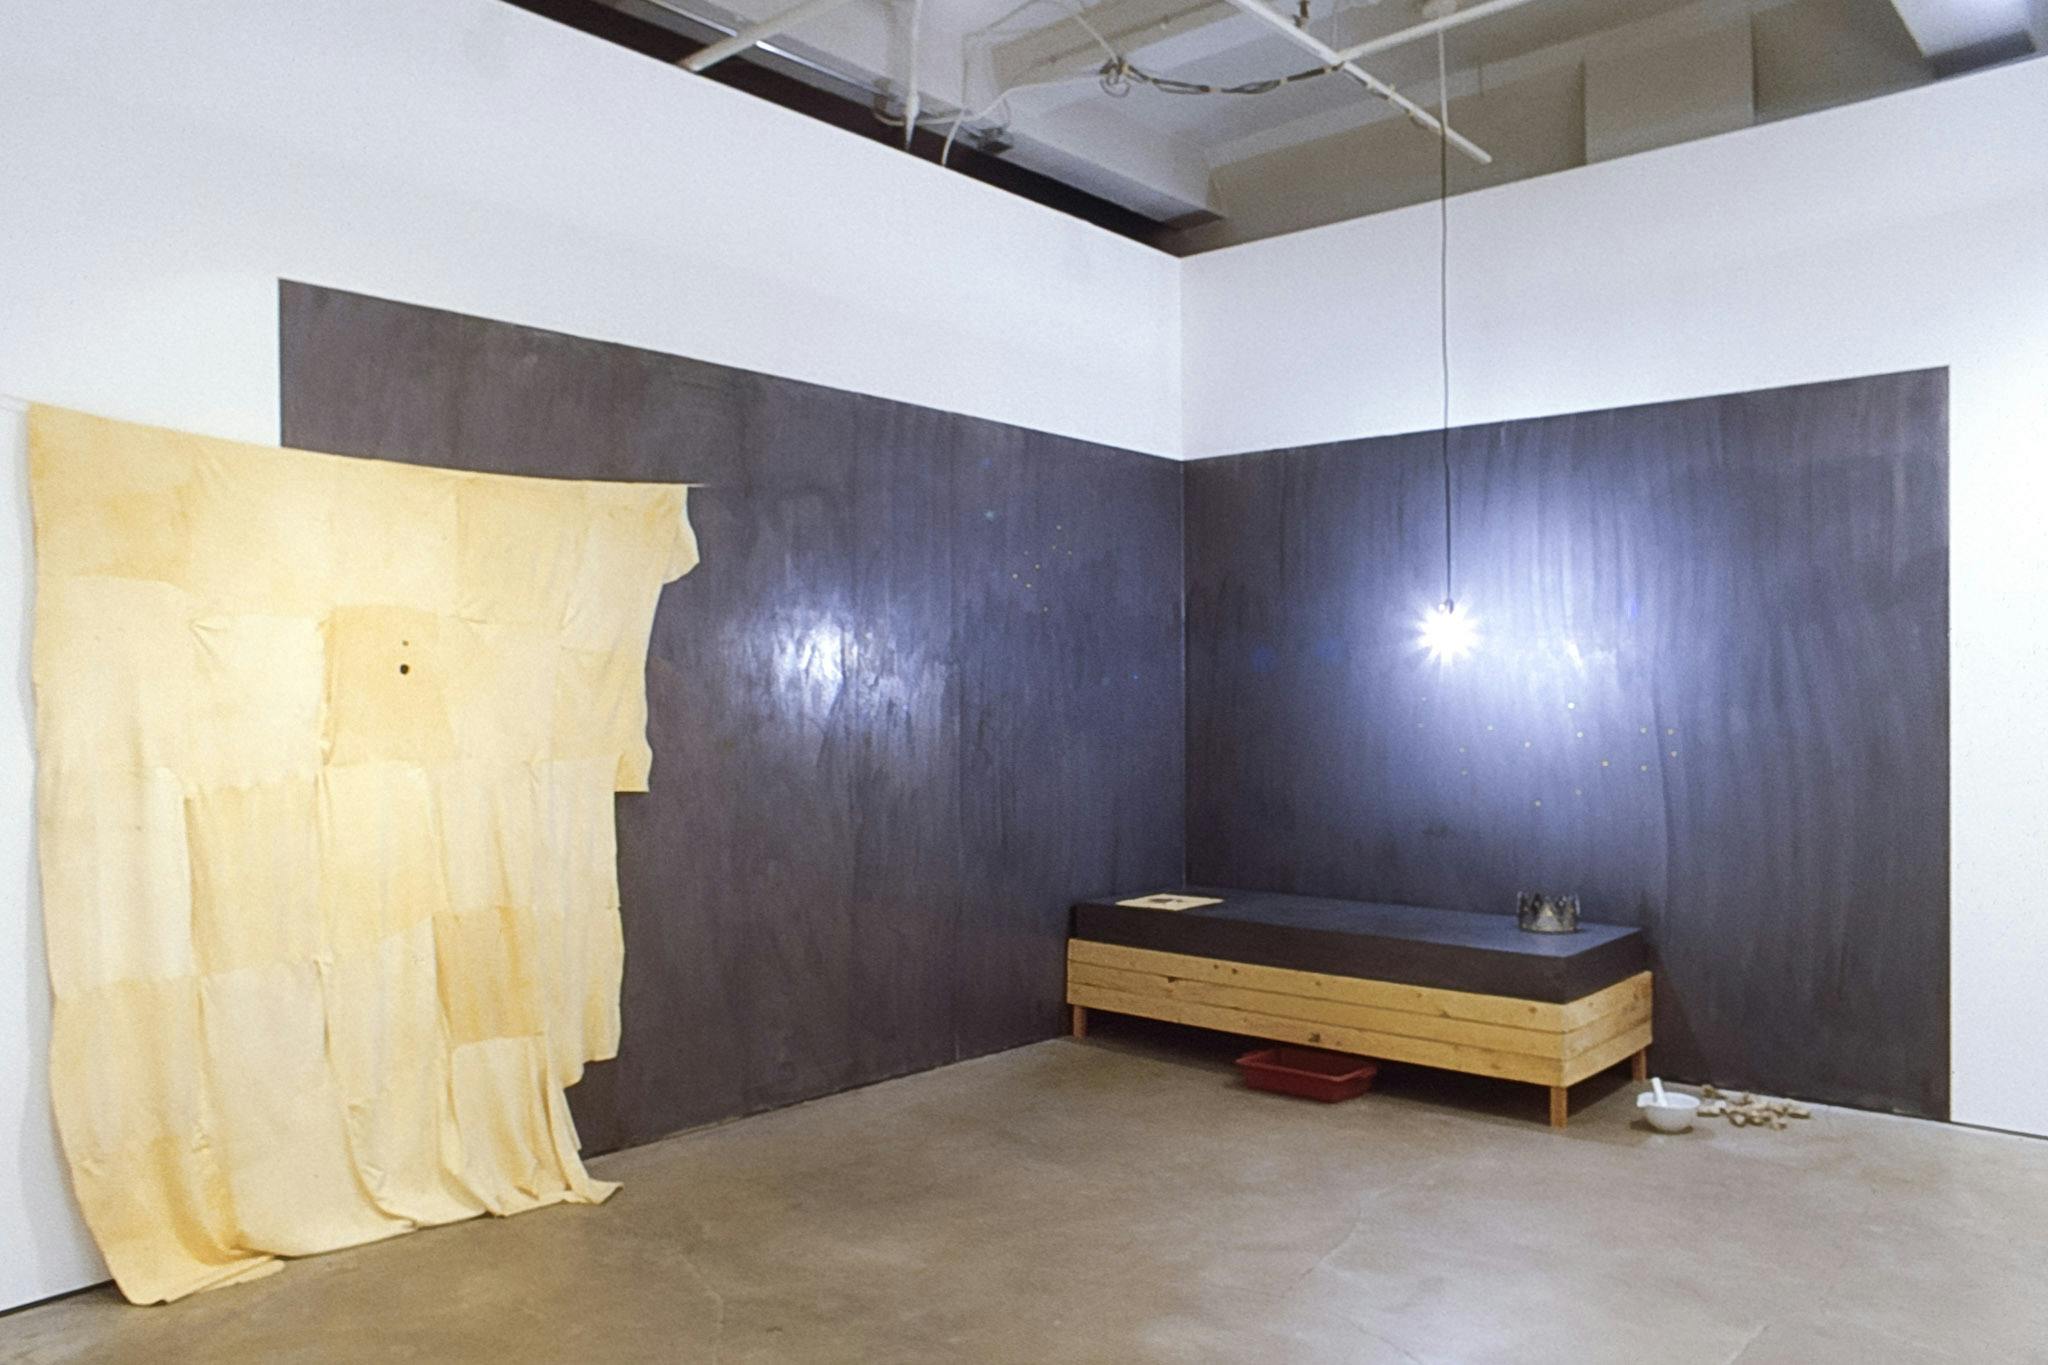 A corner of the gallery is painted in black. An old yellow blanket is hung at the end of the black-painted area. A low wooden bed frame with a black matless is placed in front of those black walls. 